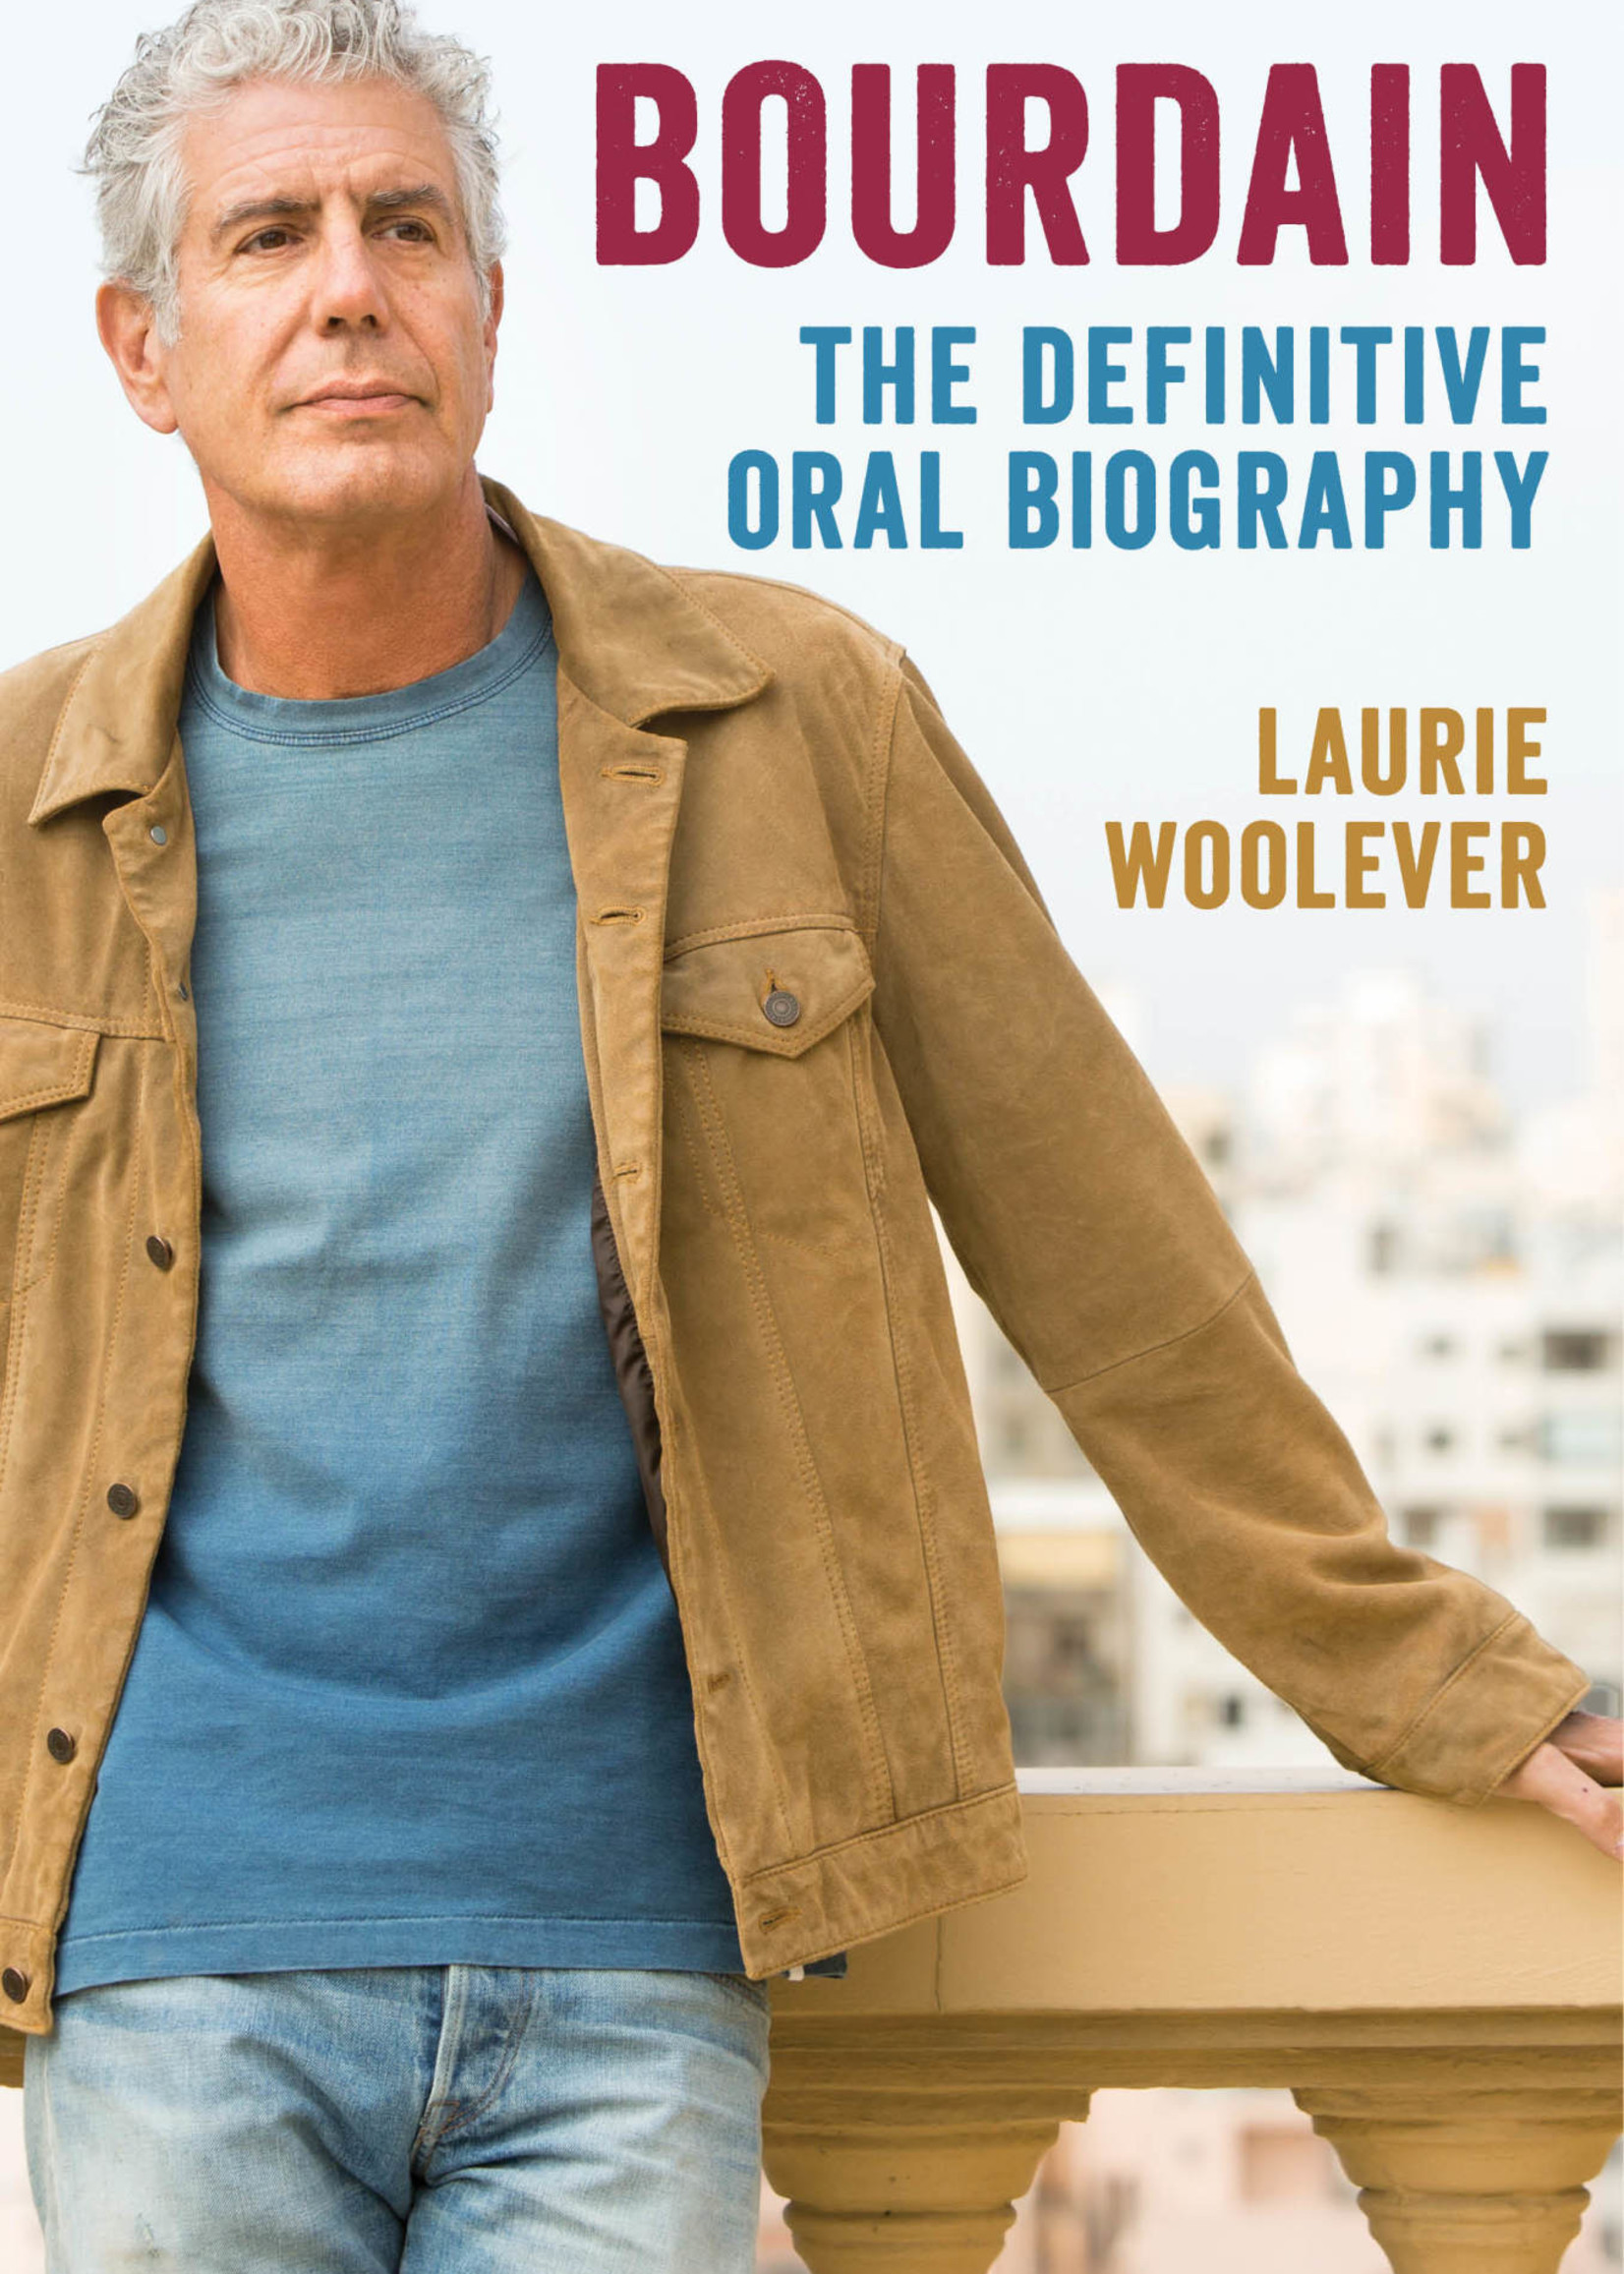 Bourdain: The Definitive Oral Biography by Laurie Woolever